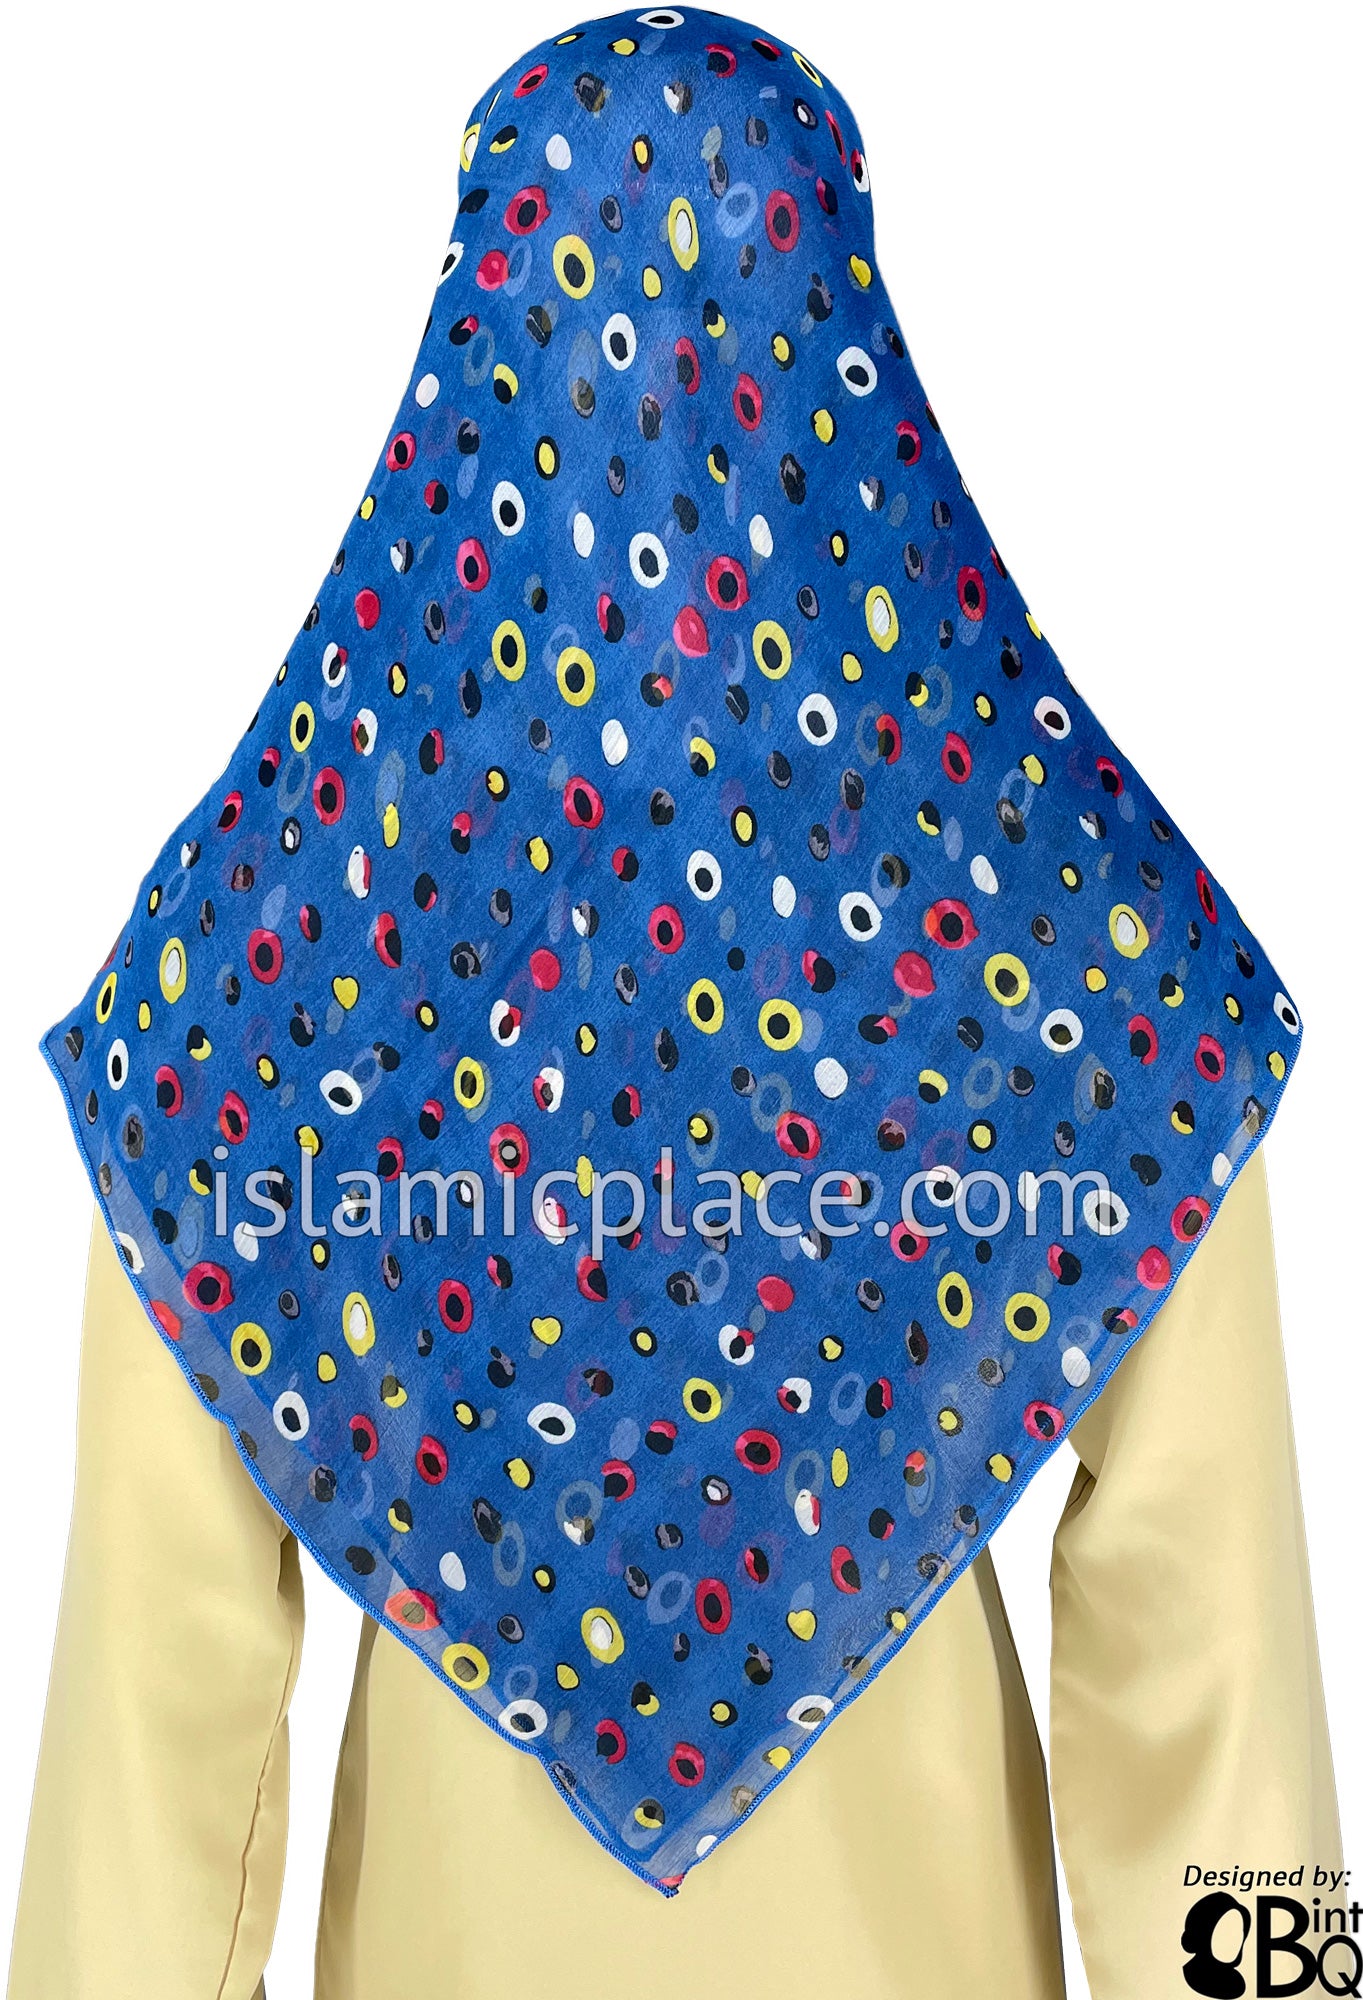 Yellow, Neon Pink, White and Black Circles on Royal Blue - 45" Square Printed Khimar